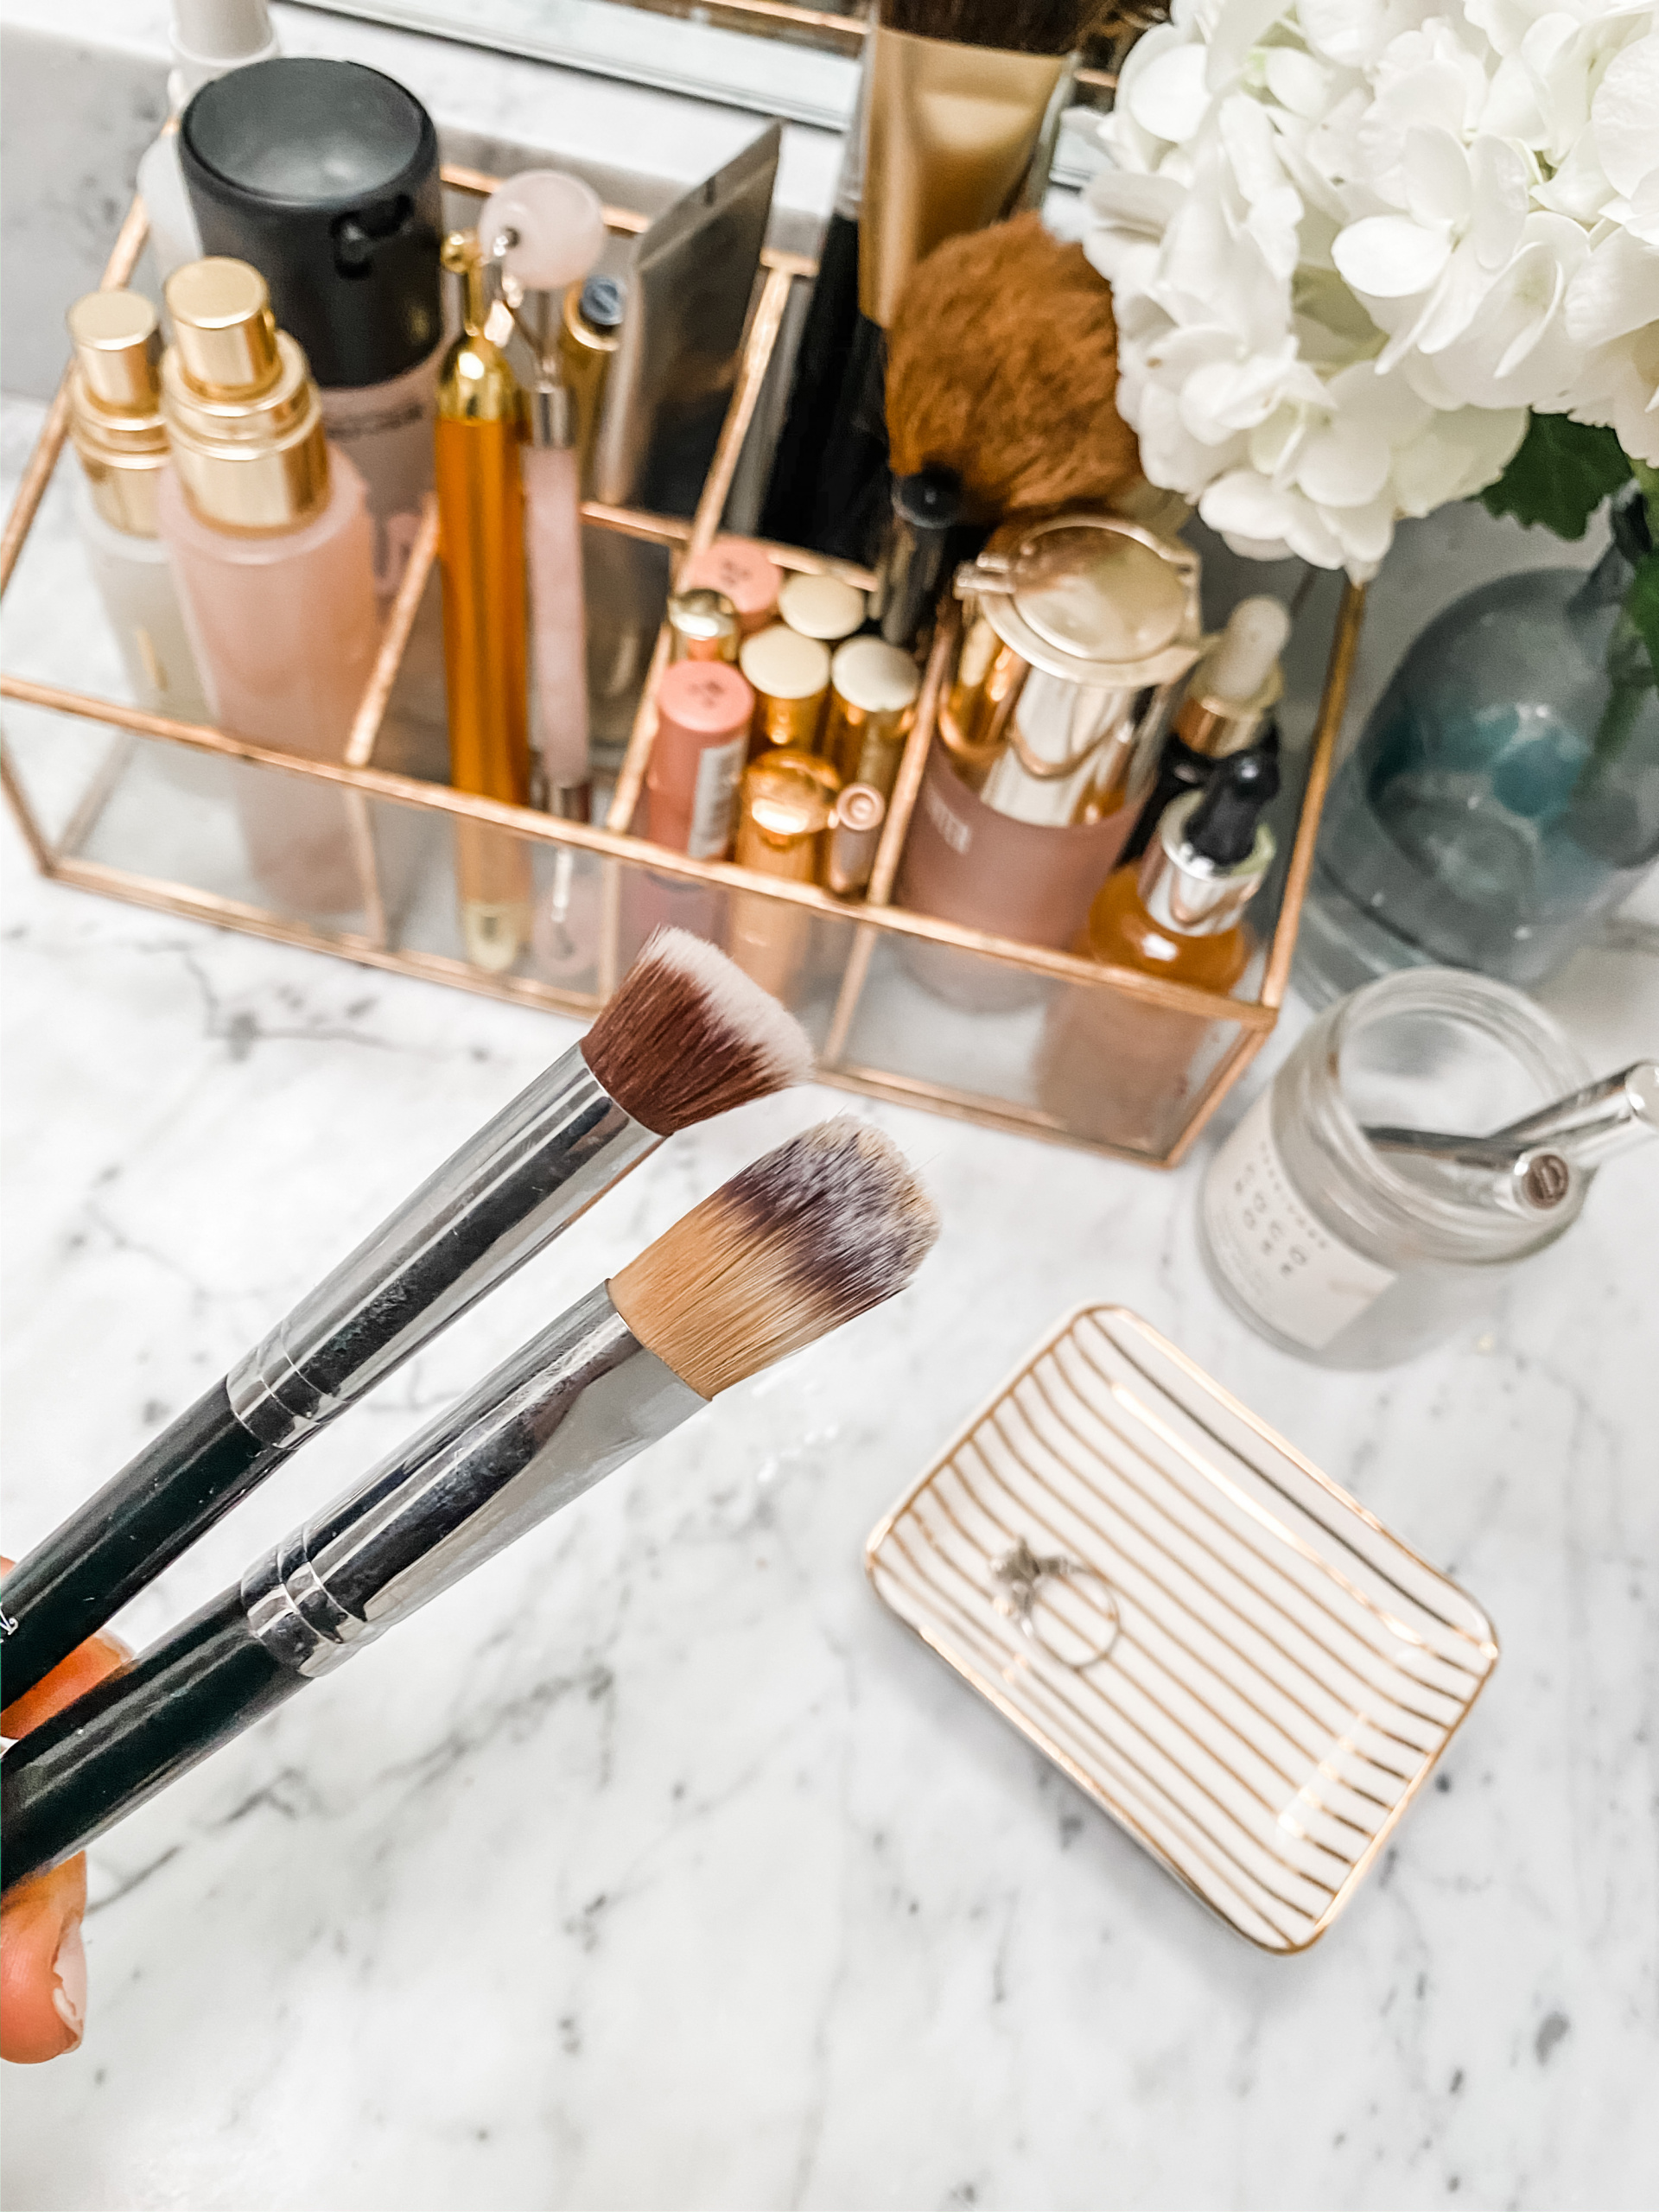 How to clean your makeup brushes. Beauty tips 2020